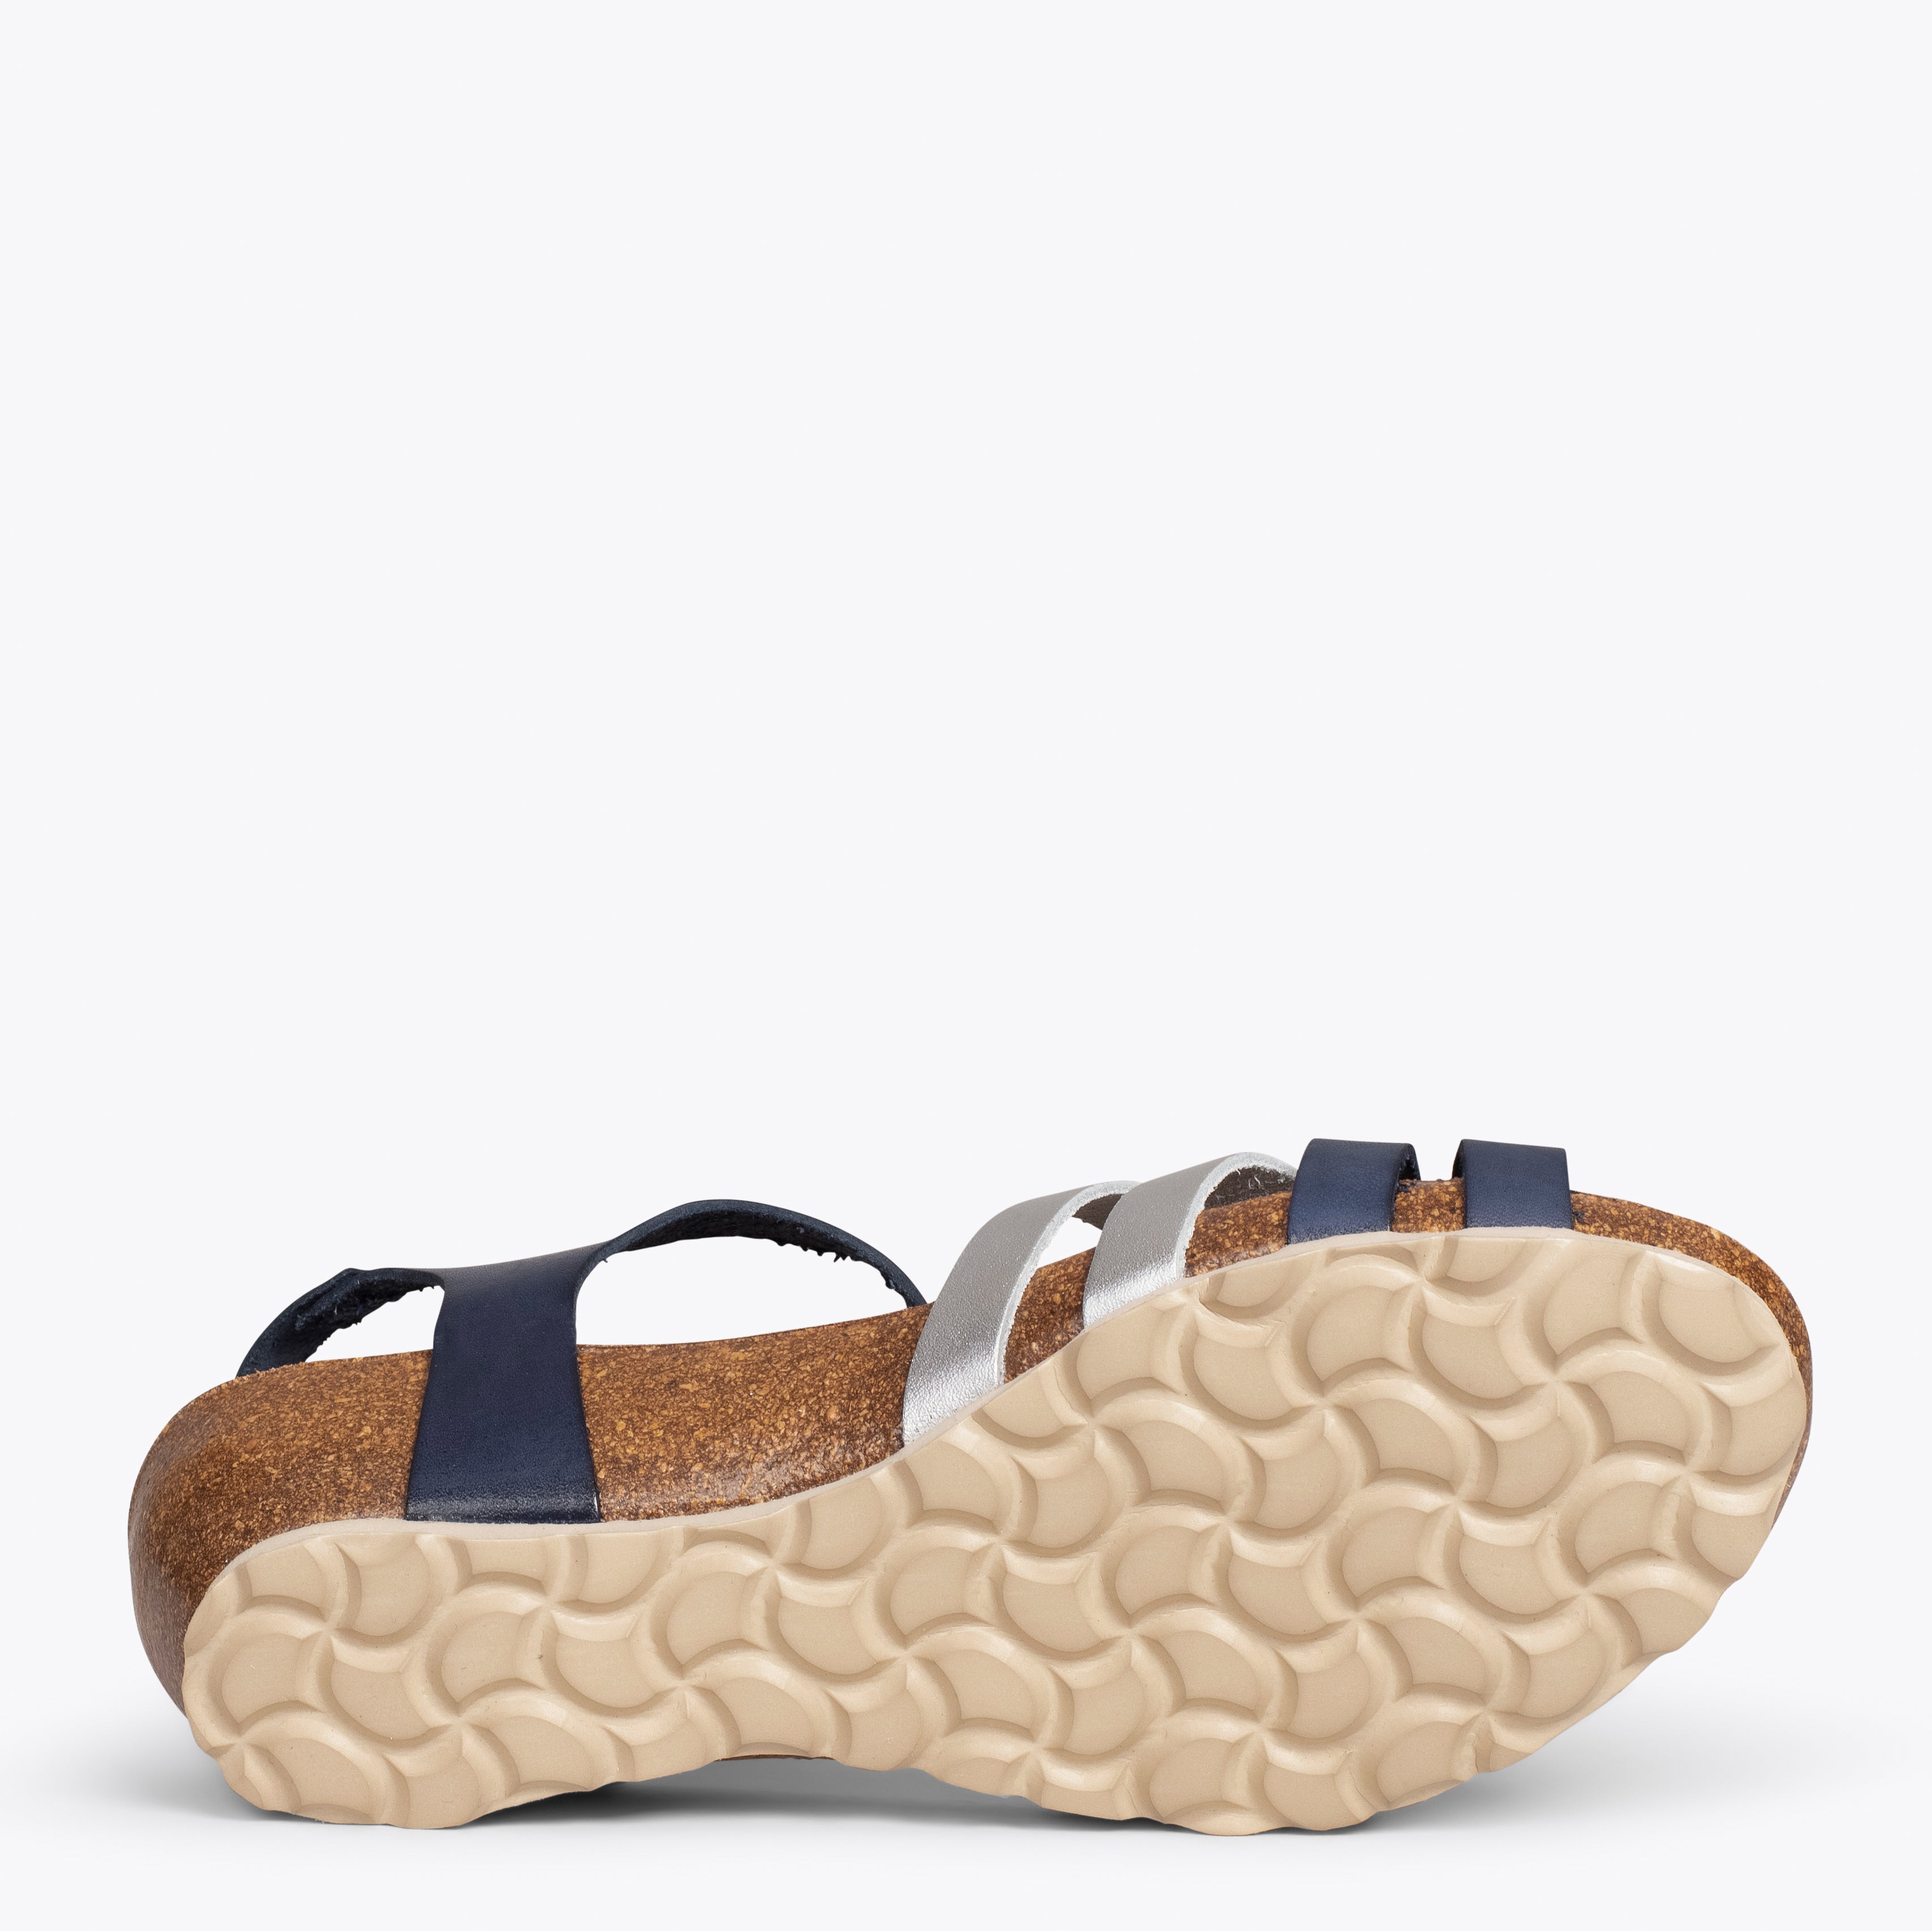 SOFT – NAVY AND SILVER sandals with BIO wedge